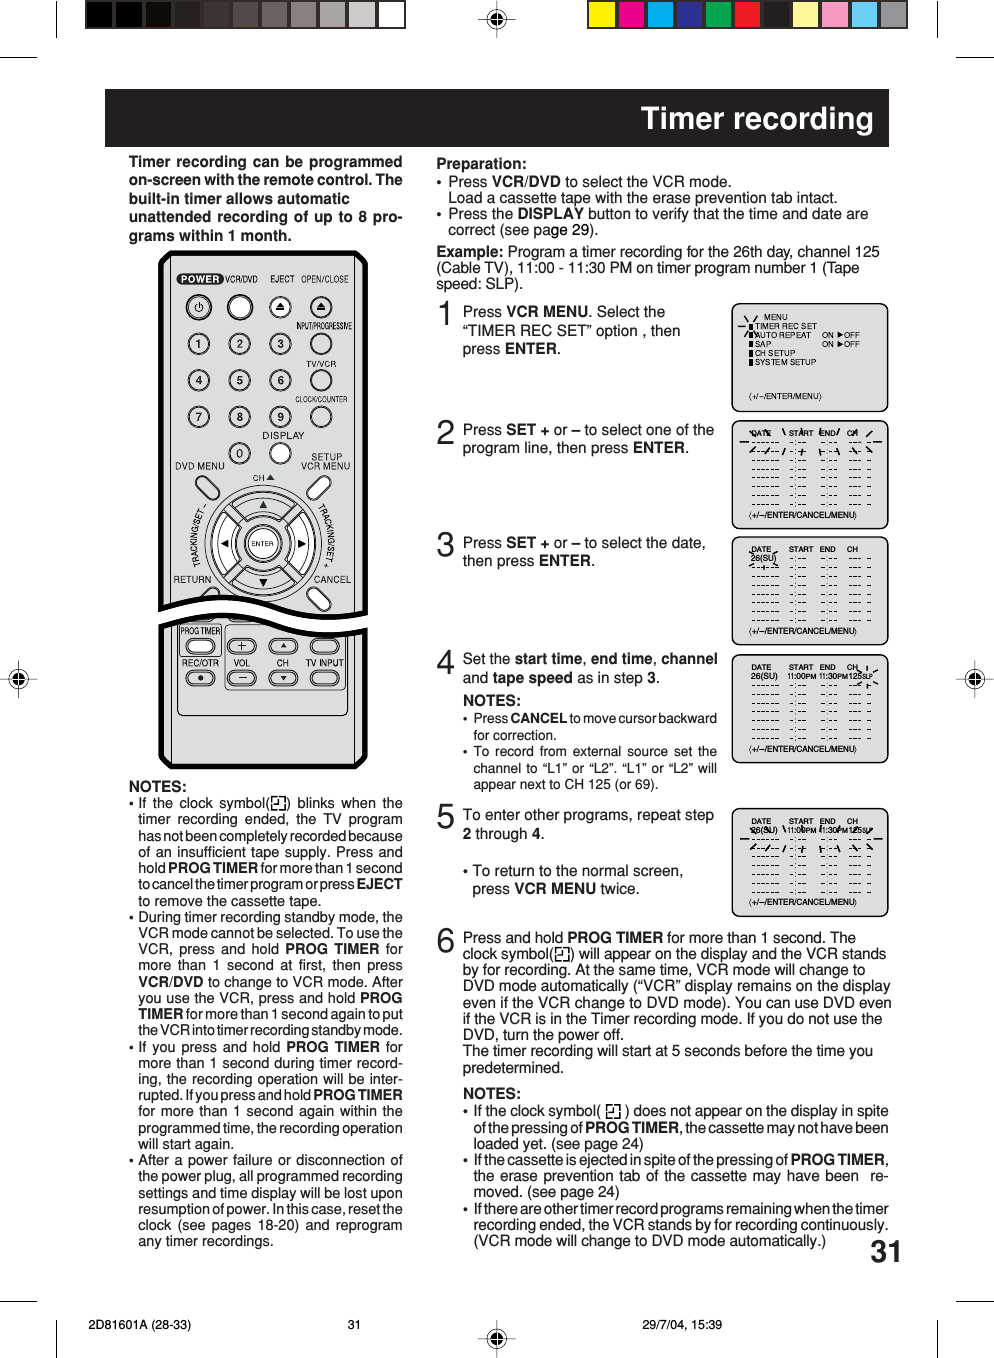 313Timer recordingPress VCR MENU. Select the“TIMER REC SET” option , thenpress ENTER.Press SET + or – to select the date,then press ENTER.12Press SET + or – to select one of theprogram line, then press ENTER.4Press VCR/DVD to select the VCR mode.Load a cassette tape with the erase prevention tab intact.Press the DISPLAY button to verify that the time and date arecorrect (see page 29).Preparation:••Timer recording can be programmedon-screen with the remote control. Thebuilt-in timer allows automaticunattended recording of up to 8 pro-grams within 1 month.Set the start time, end time, channeland tape speed as in step 3.Example: Program a timer recording for the 26th day, channel 125(Cable TV), 11:00 - 11:30 PM on timer program number 1 (Tapespeed: SLP).NOTES:Press CANCEL to move cursor backwardfor correction.To record from external source set thechannel to “L1” or “L2”. “L1” or “L2” willappear next to CH 125 (or 69).••5To enter other programs, repeat step2 through 4.• To return to the normal screen,press VCR MENU twice.6Press and hold PROG TIMER for more than 1 second. Theclock symbol( ) will appear on the display and the VCR standsby for recording. At the same time, VCR mode will change toDVD mode automatically (“VCR” display remains on the displayeven if the VCR change to DVD mode). You can use DVD evenif the VCR is in the Timer recording mode. If you do not use theDVD, turn the power off.The timer recording will start at 5 seconds before the time youpredetermined.NOTES:If the clock symbol(   ) does not appear on the display in spiteof the pressing of PROG TIMER, the cassette may not have beenloaded yet. (see page 24)If the cassette is ejected in spite of the pressing of PROG TIMER,the erase prevention tab of the cassette may have been  re-moved. (see page 24)If there are other timer record programs remaining when the timerrecording ended, the VCR stands by for recording continuously.(VCR mode will change to DVD mode automatically.)•••NOTES:•If the clock symbol( ) blinks when thetimer recording ended, the TV programhas not been completely recorded becauseof an insufficient tape supply. Press andhold PROG TIMER for more than 1 secondto cancel the timer program or press EJECTto remove the cassette tape.•During timer recording standby mode, theVCR mode cannot be selected. To use theVCR, press and hold PROG TIMER formore than 1 second at first, then pressVCR/DVD to change to VCR mode. Afteryou use the VCR, press and hold PROGTIMER for more than 1 second again to putthe VCR into timer recording standby mode.•If you press and hold PROG TIMER formore than 1 second during timer record-ing, the recording operation will be inter-rupted. If you press and hold PROG TIMERfor more than 1 second again within theprogrammed time, the recording operationwill start again.•After a power failure or disconnection ofthe power plug, all programmed recordingsettings and time display will be lost uponresumption of power. In this case, reset theclock (see pages 18-20) and reprogramany timer recordings.+/-/ENTER/CANCEL/MENUDATE START END CH–+/-/ENTER/CANCEL/MENUDATE START END CH 26(SU)+/-/ENTER/CANCEL/MENUDATE START END CH26(SU)11:00PM11:30PM125SLP+/-/ENTER/CANCEL/MENUDATE START END CH26(SU)11:00PM11:30PM125SLP 2D81601A (28-33) 29/7/04, 15:3931